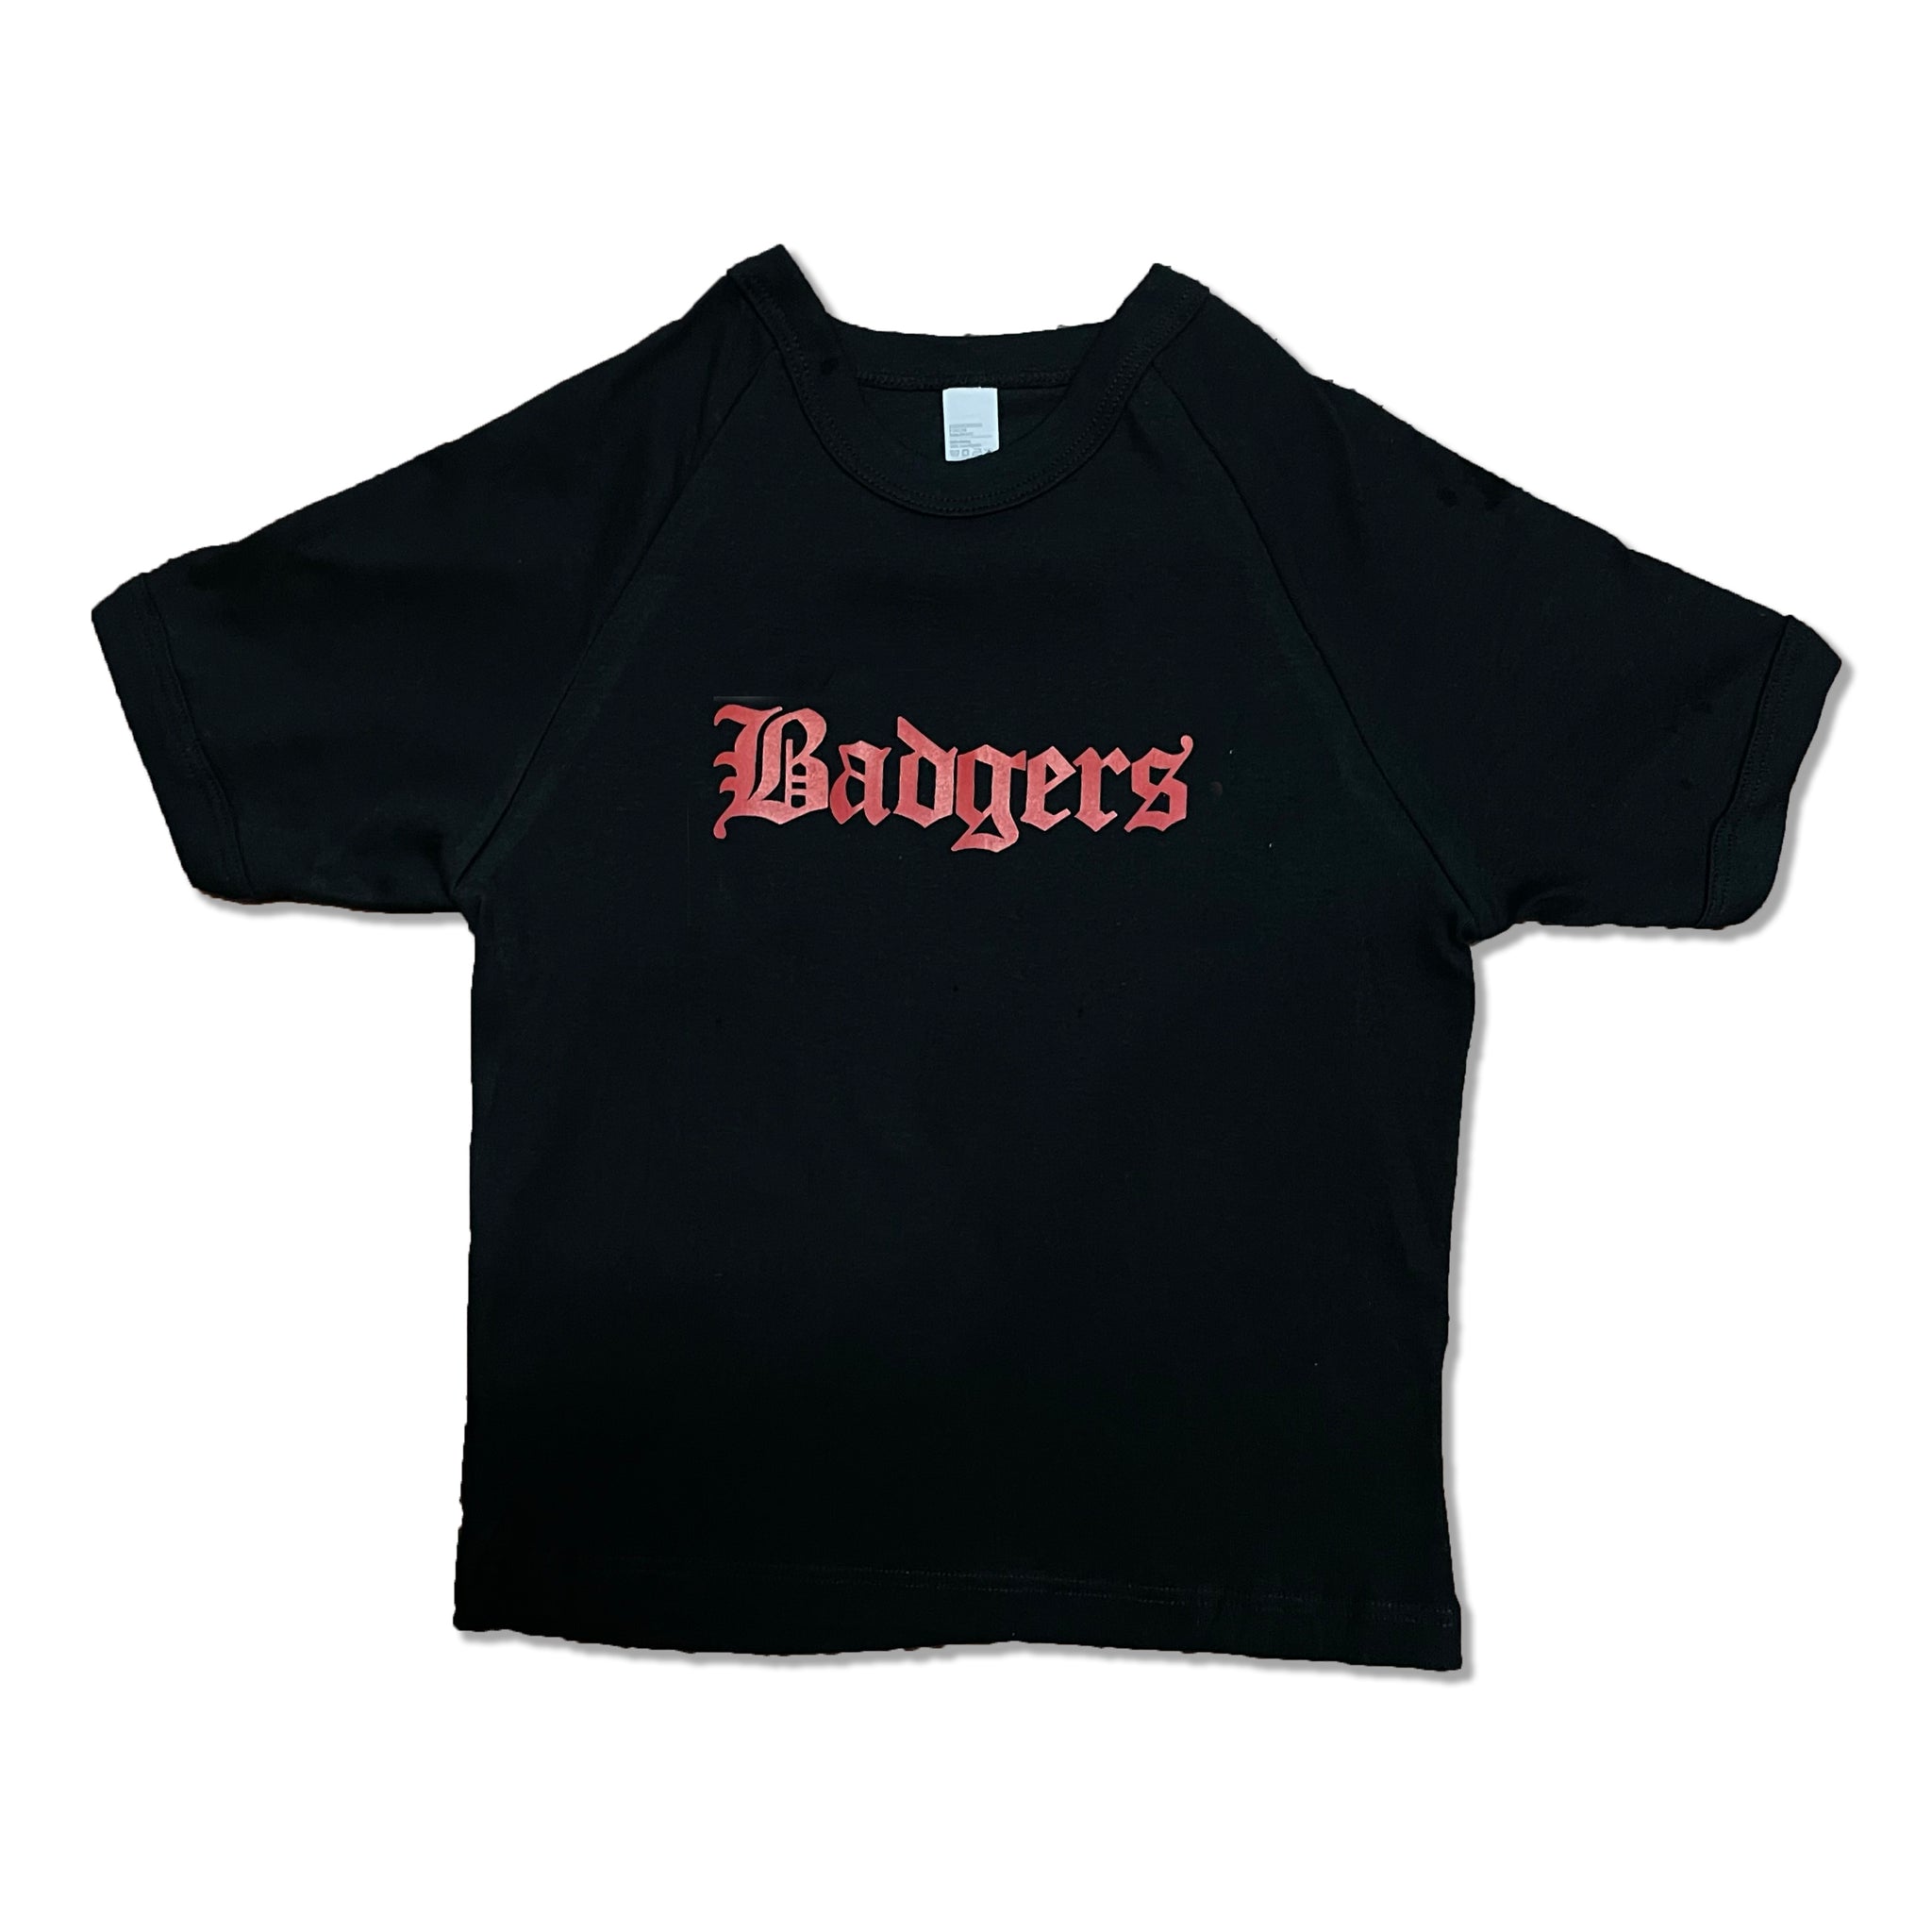 Gothic Badger Baby tee